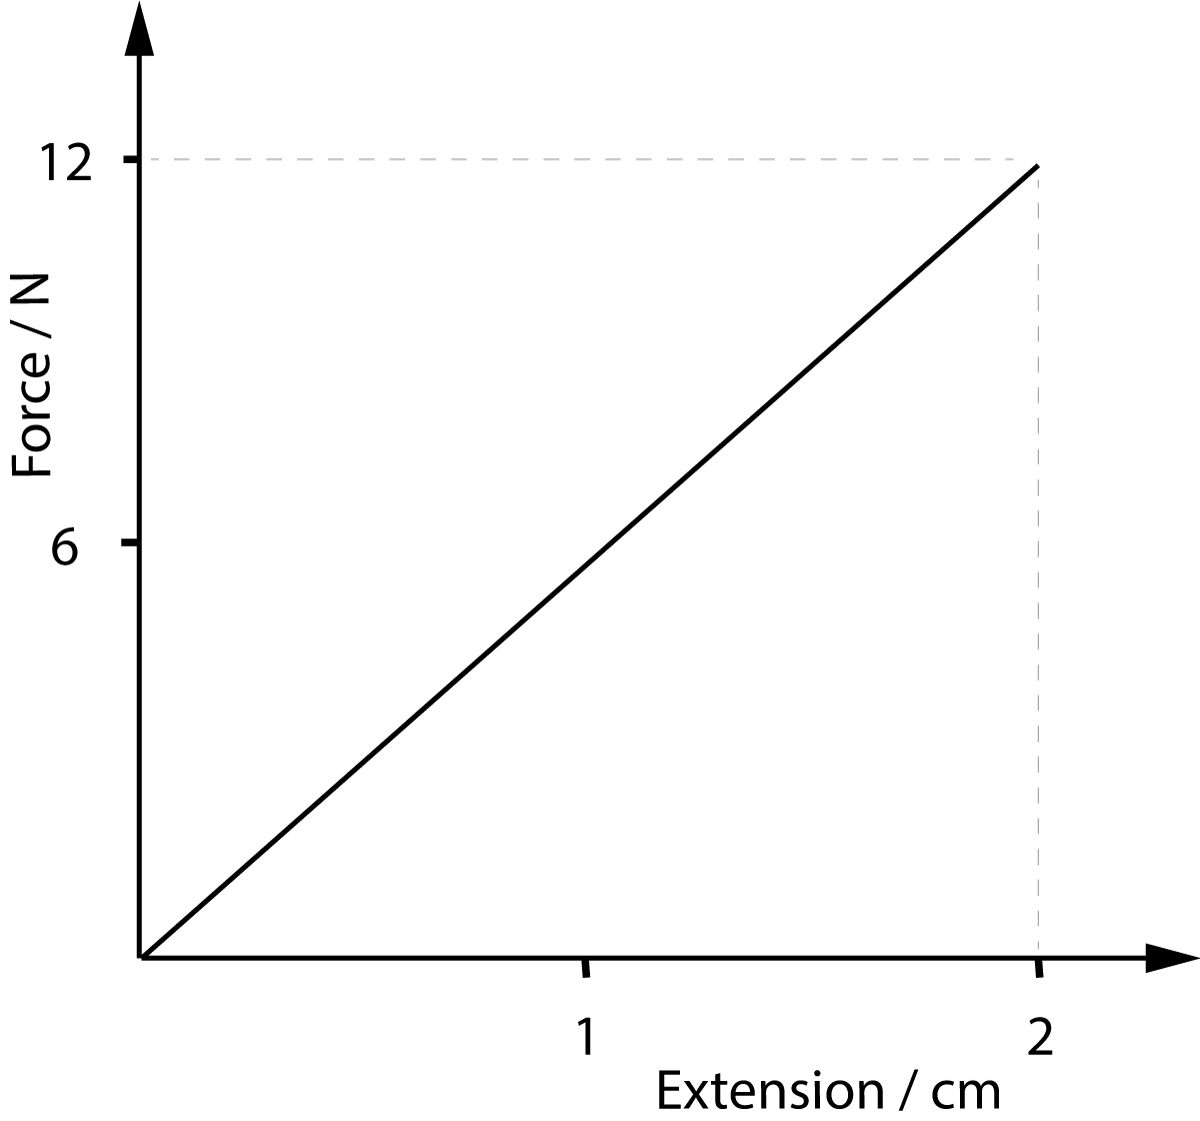 force-extension graph for a steel cable